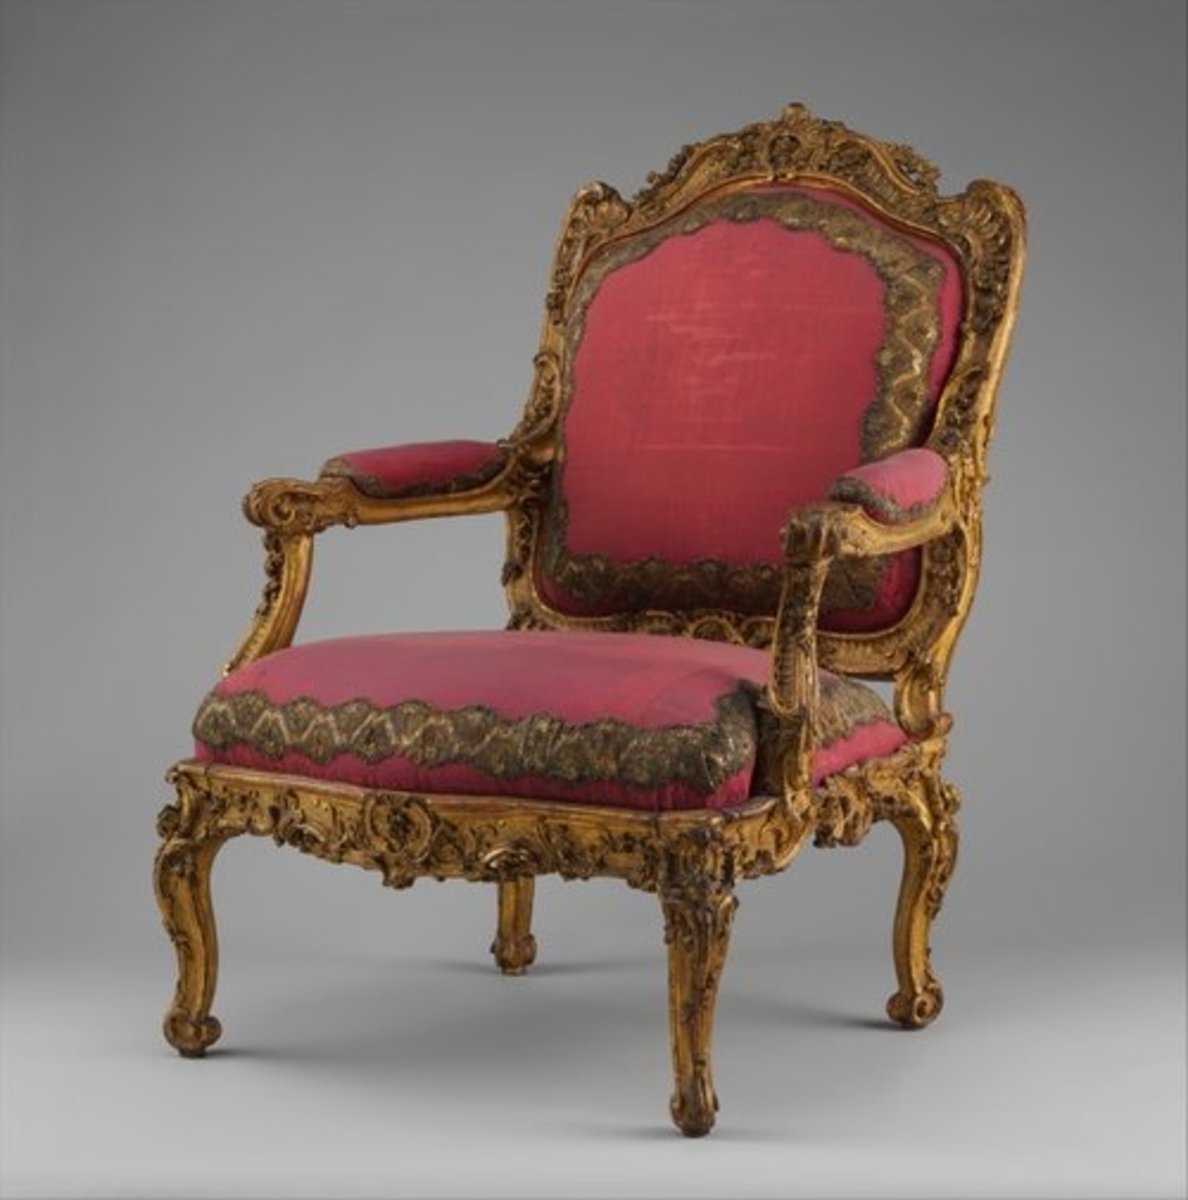 This Louis XV "fauteuil" armchair can be dated back to the 18th century.